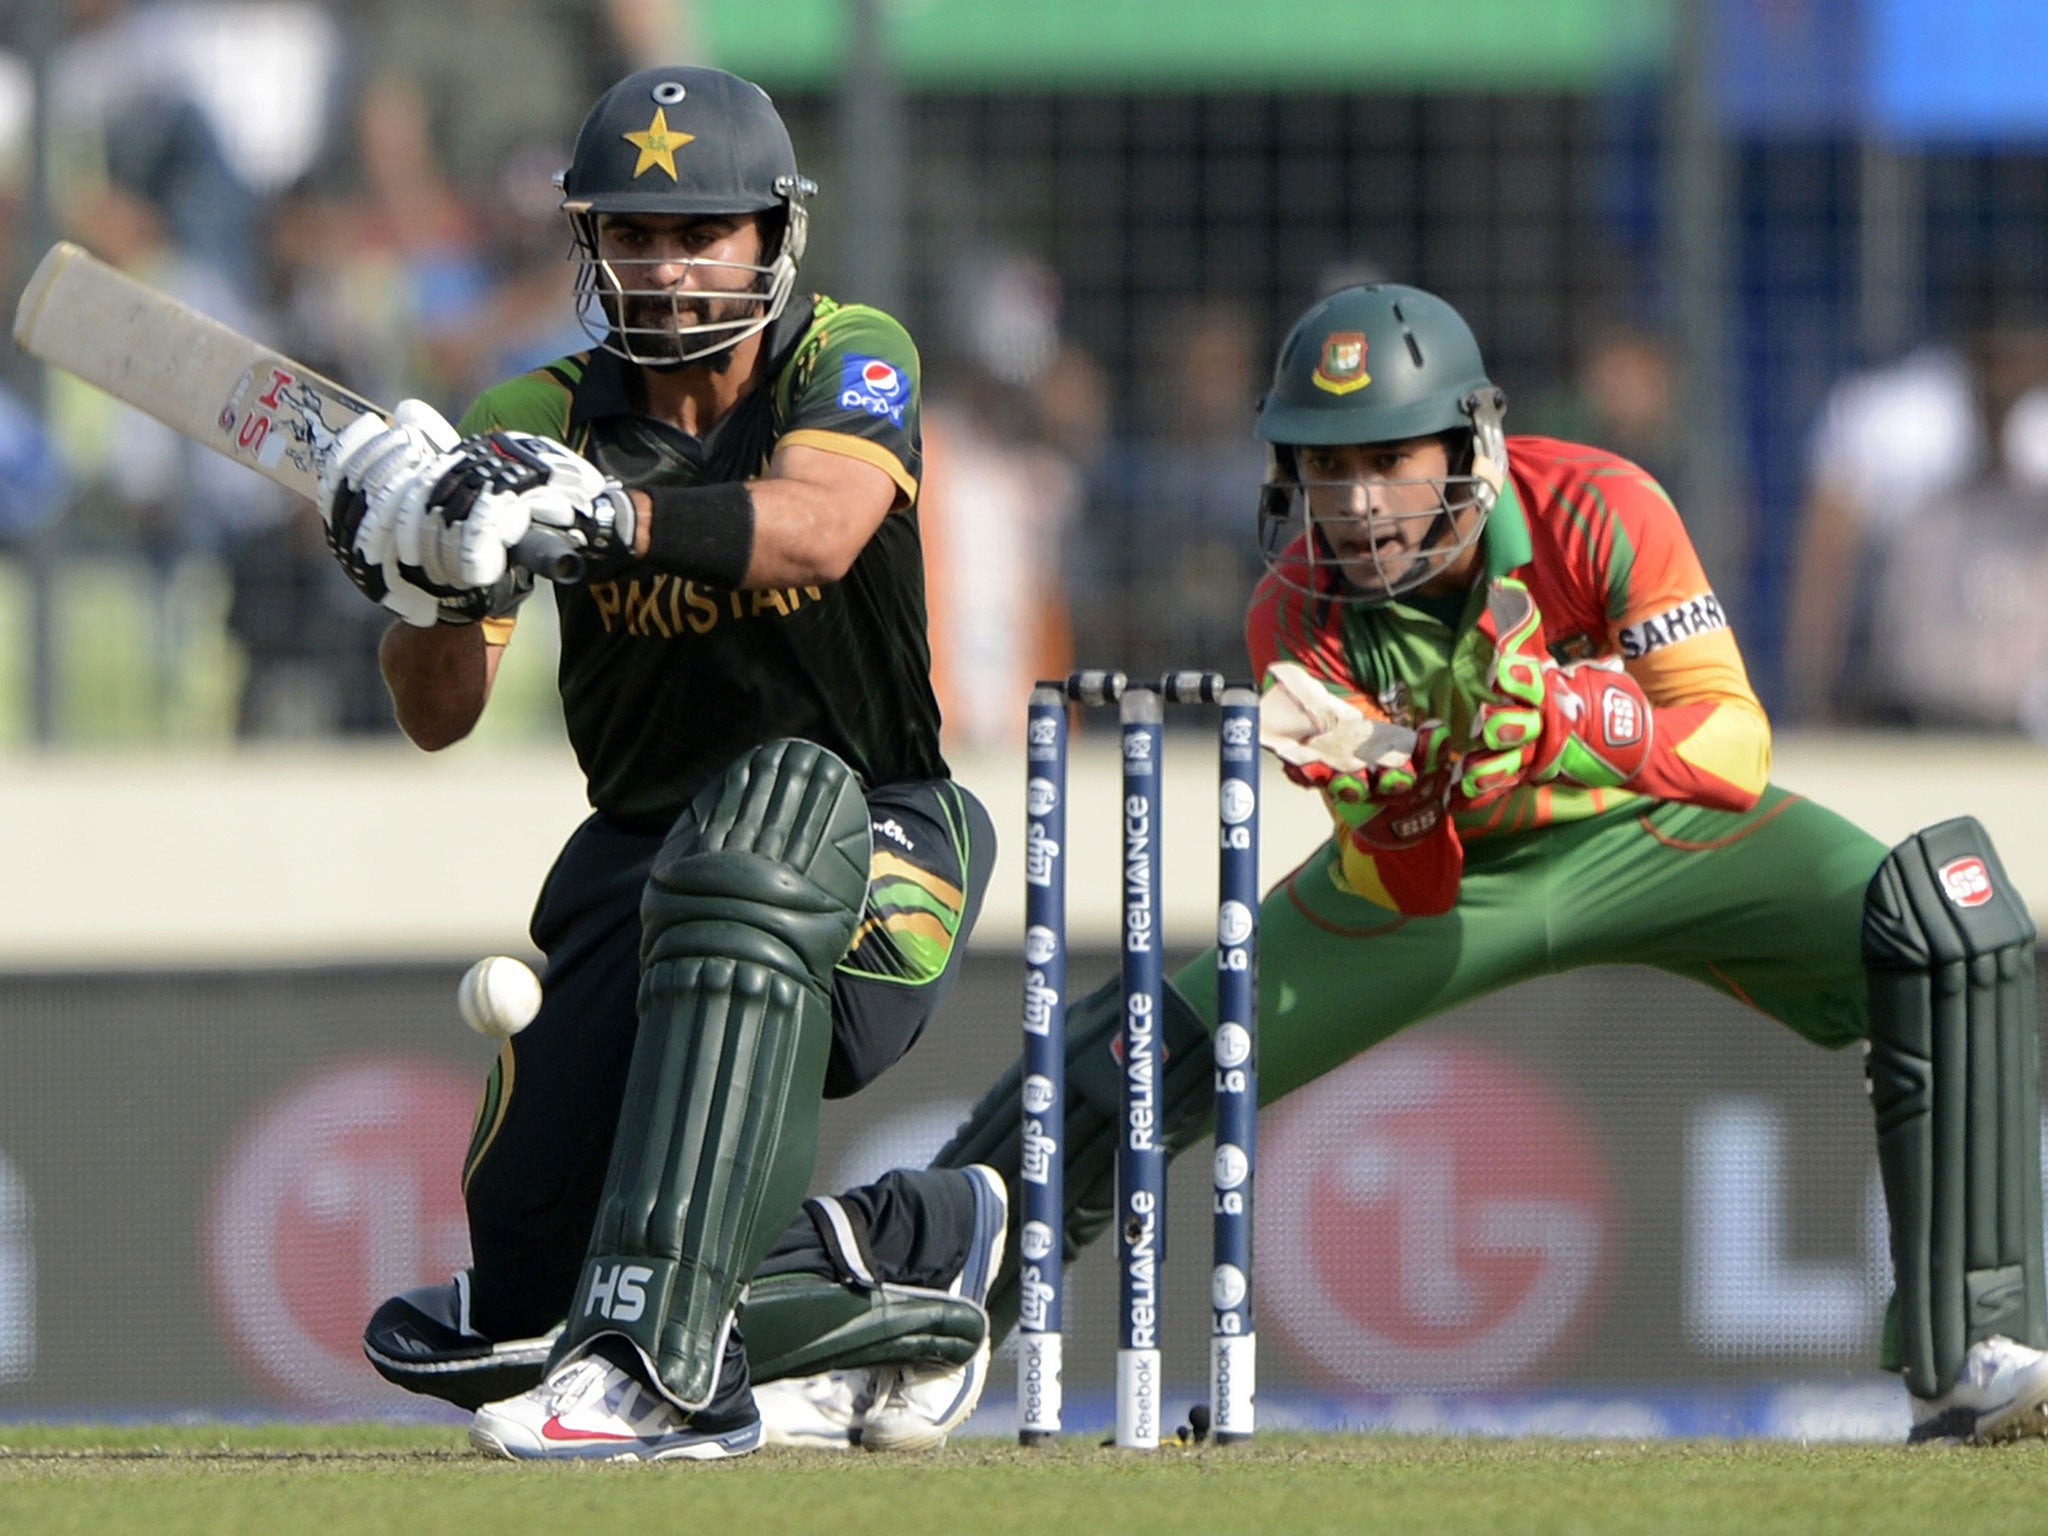 Pakistan’s Ahmed Shehzad sweeps on his way to an unbeaten century